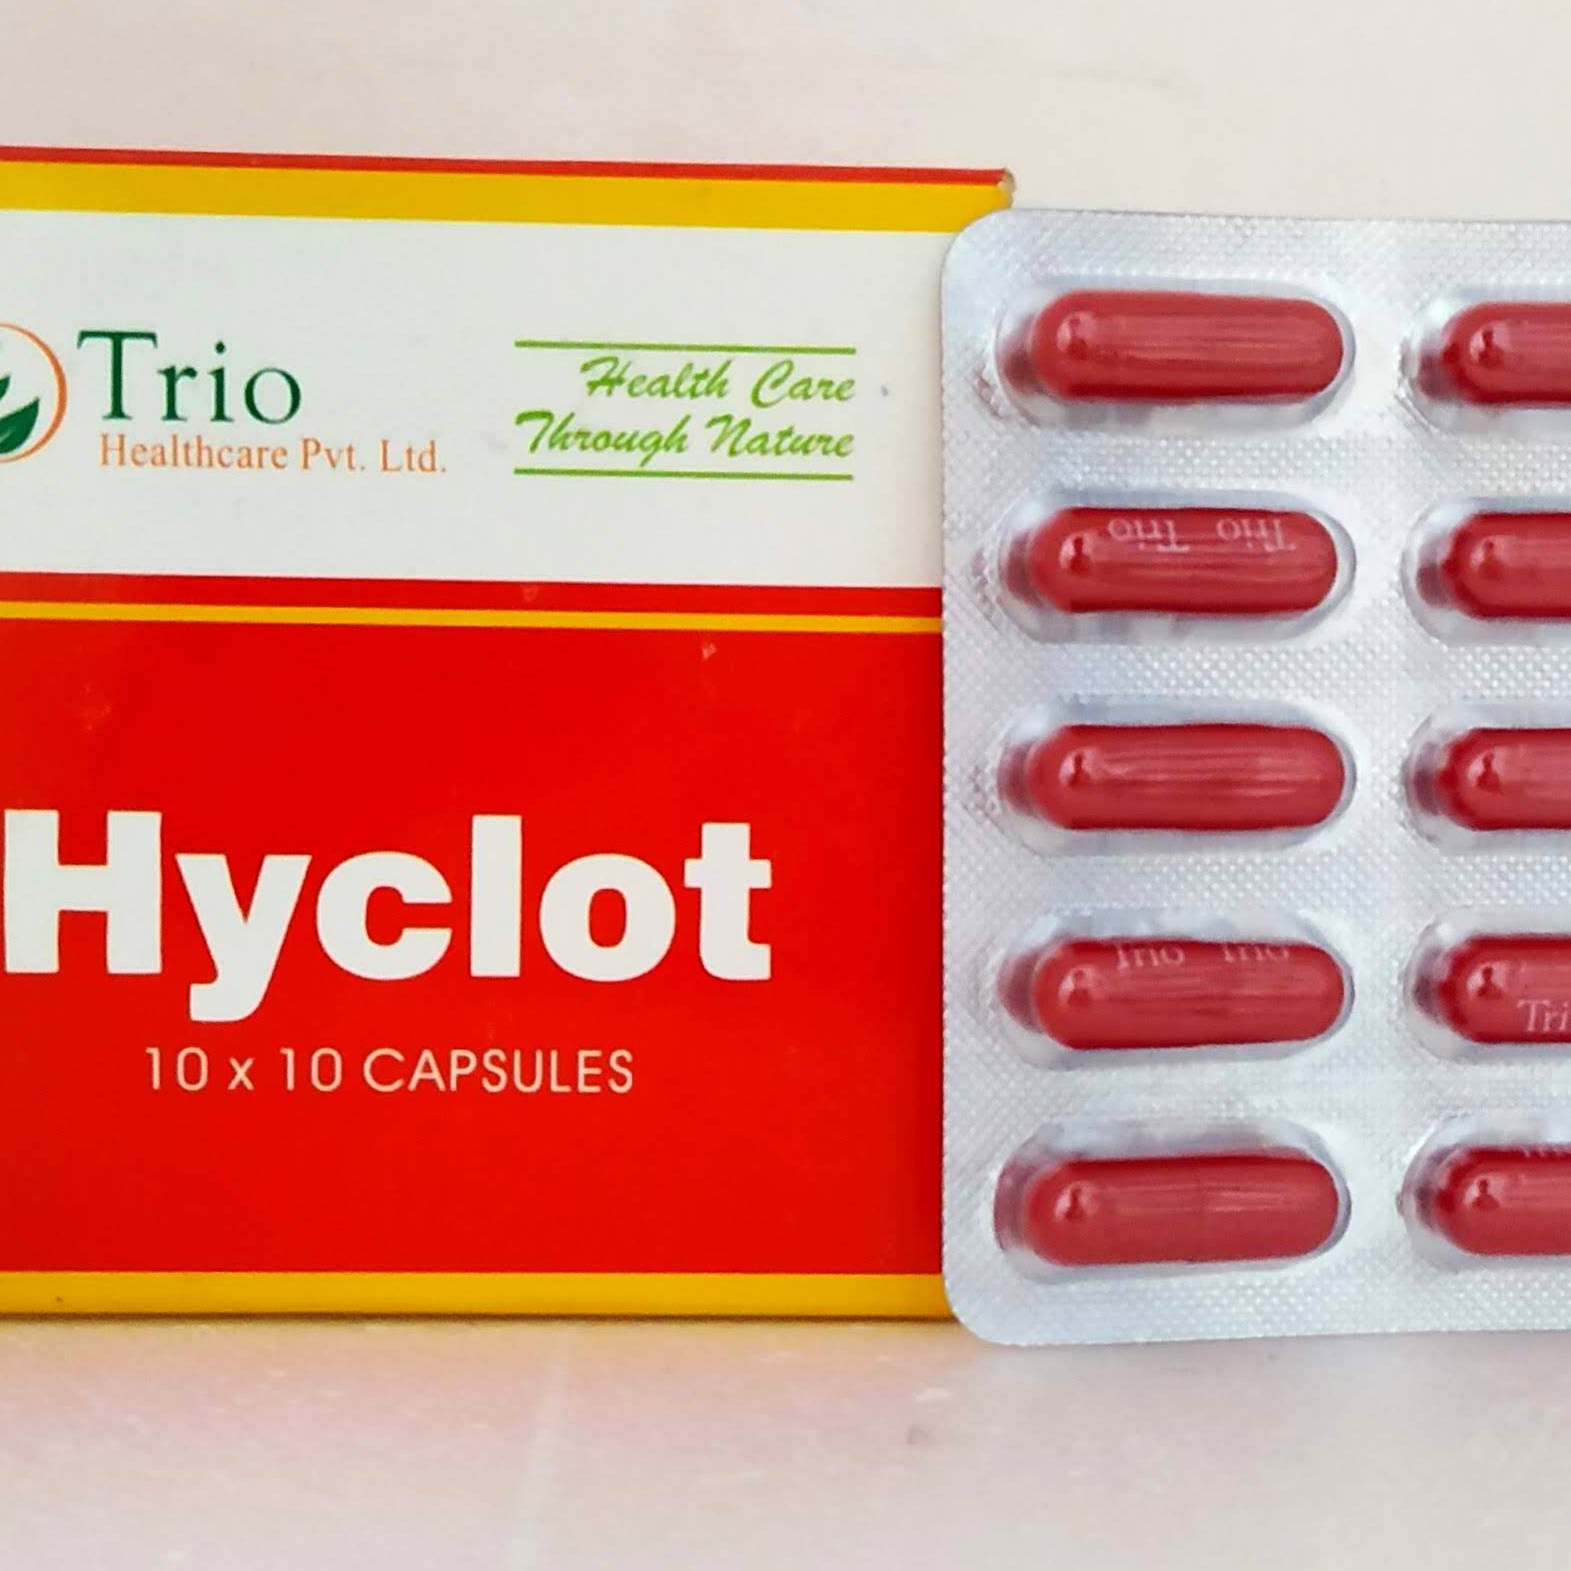 Shop Hyclot Capsules - 10Capsules at price 55.00 from Trio Online - Ayush Care